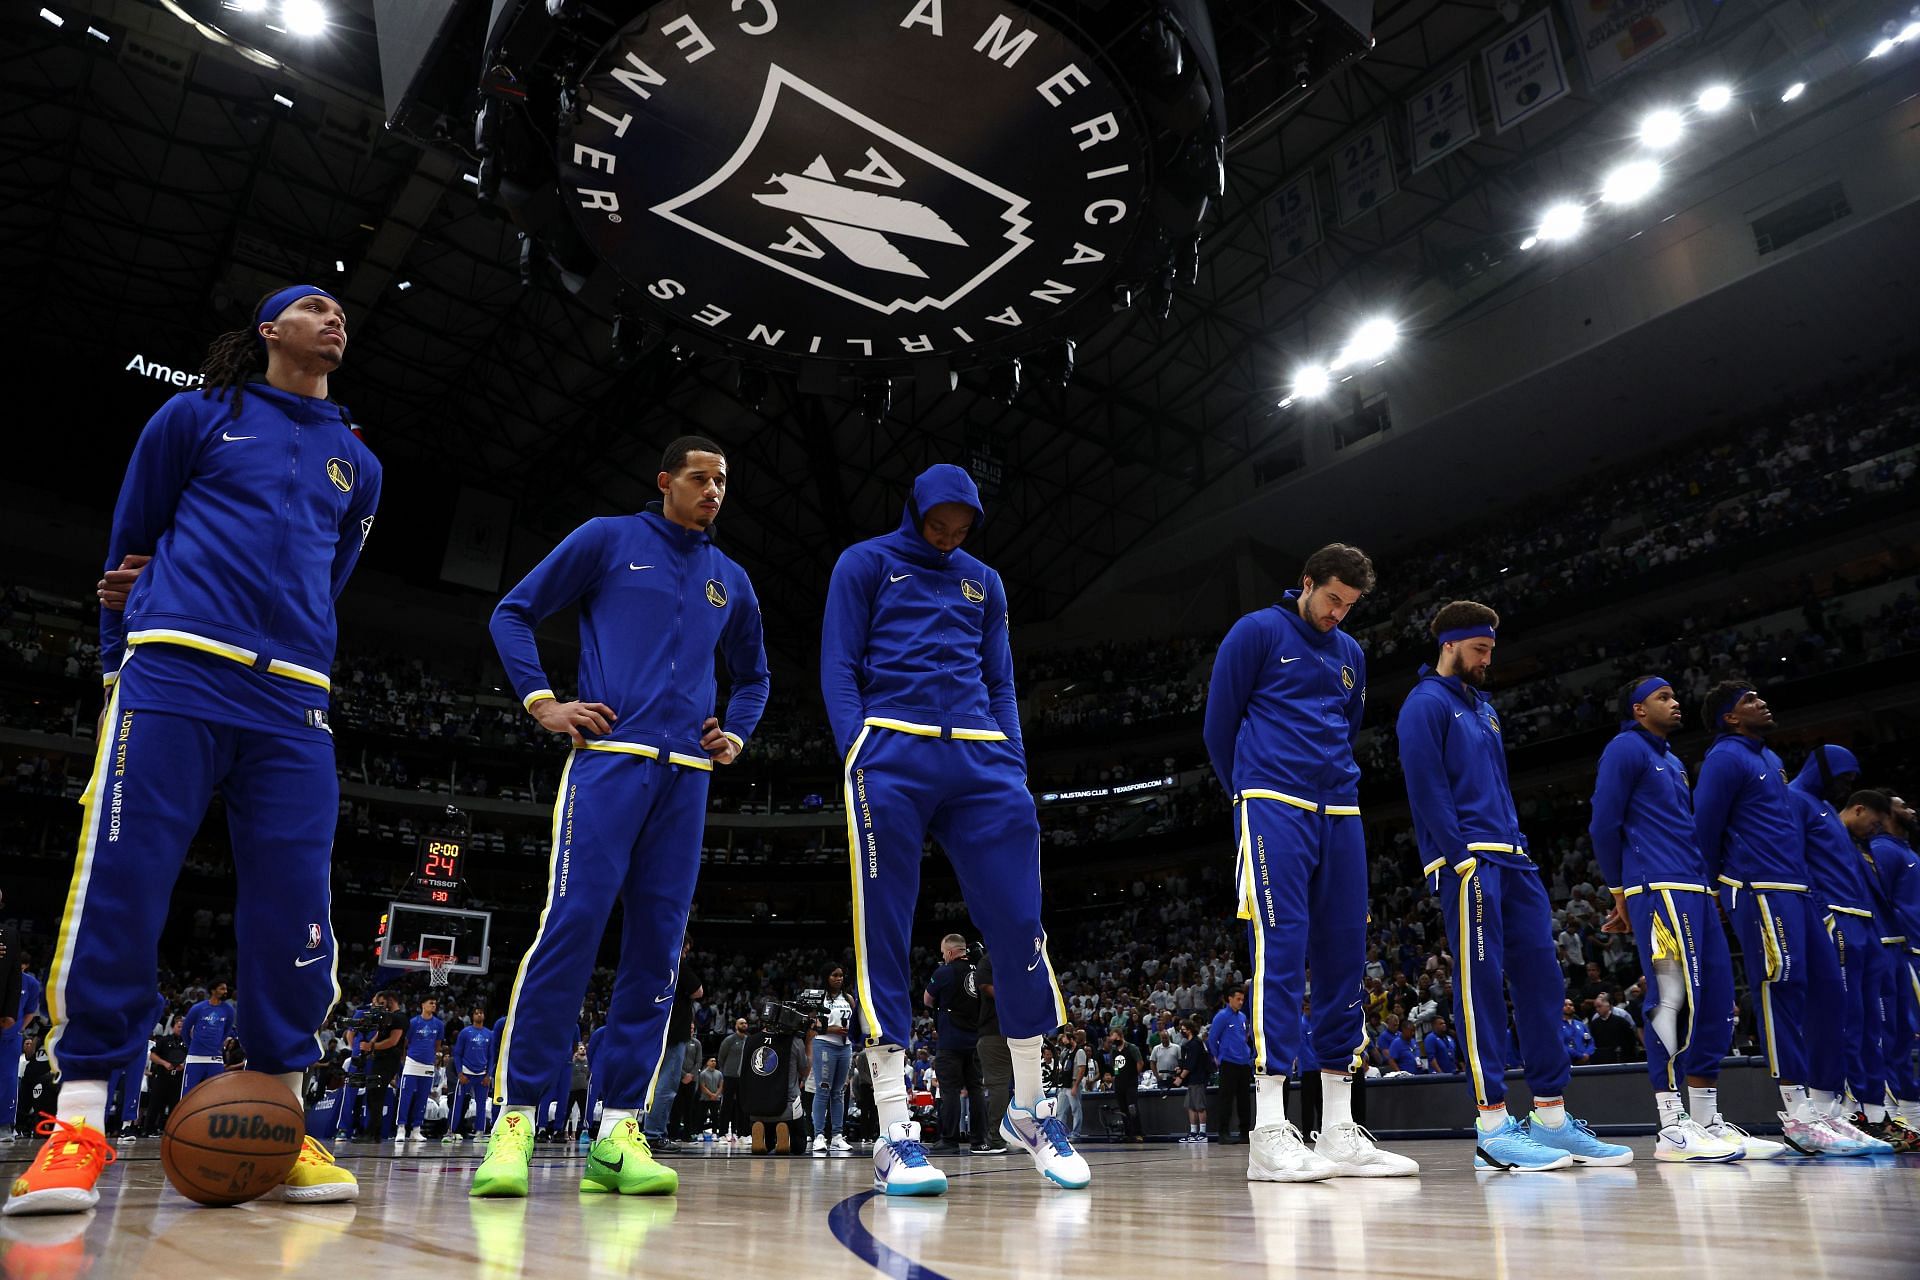 Stephen Curry and his teammates during a minutes silence for the victims in the Texas elementary school shooting